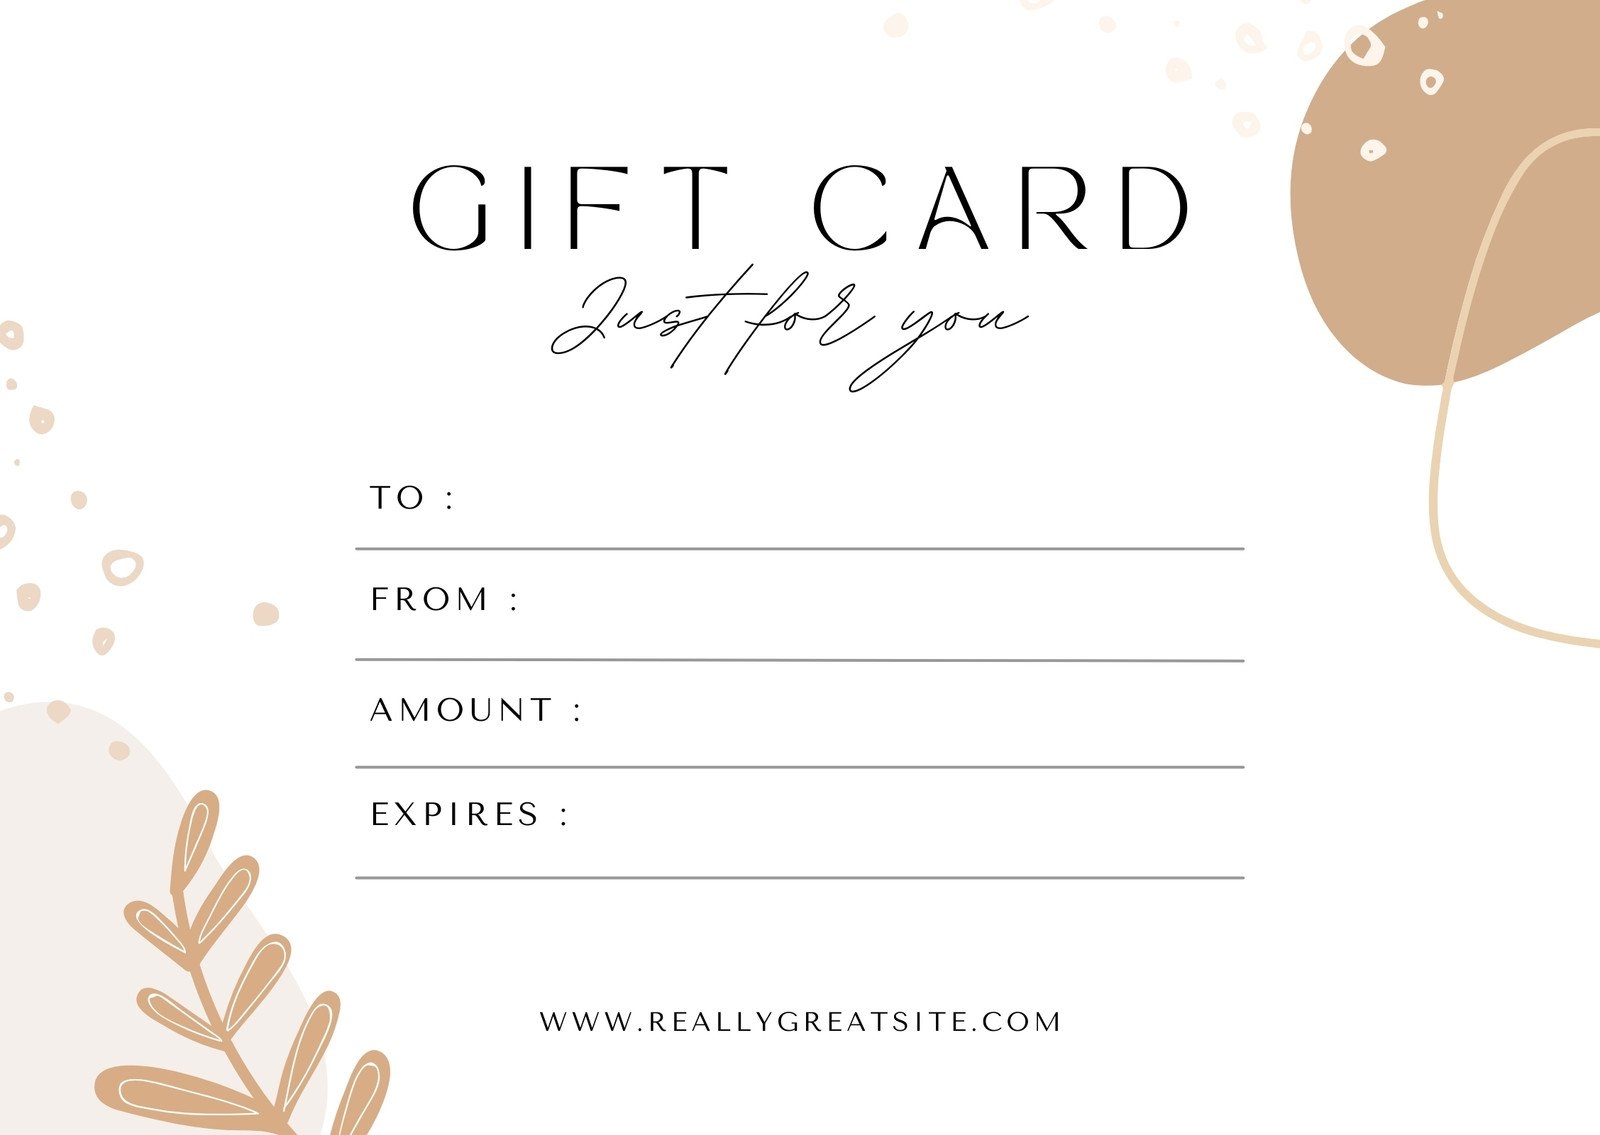 Free Printable Template For Gift Certificate